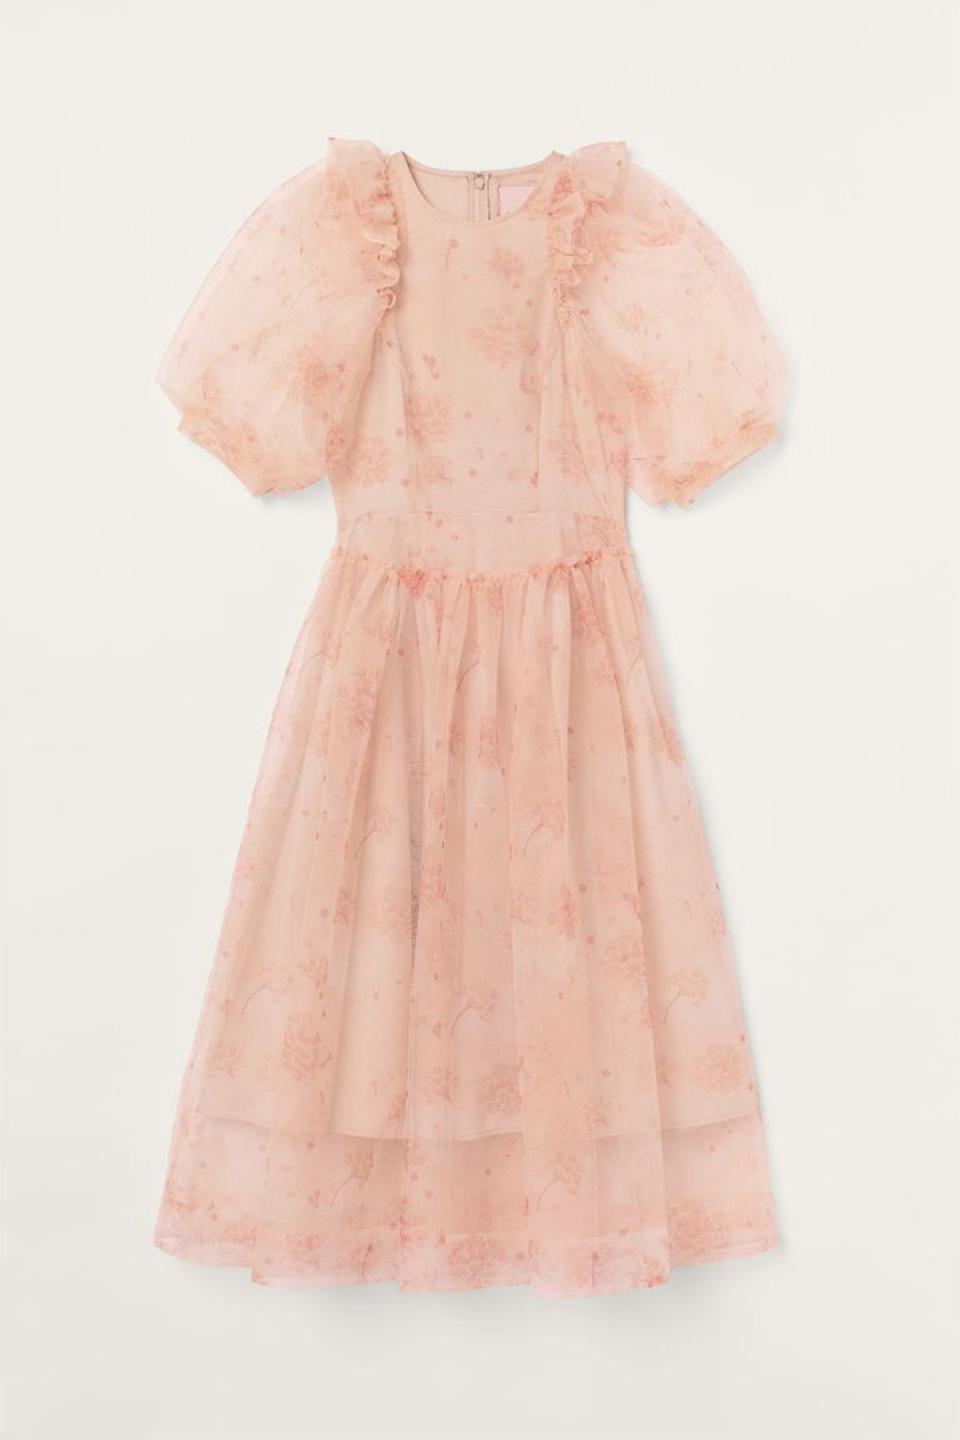 8) Puff-Sleeved Tulle Dress